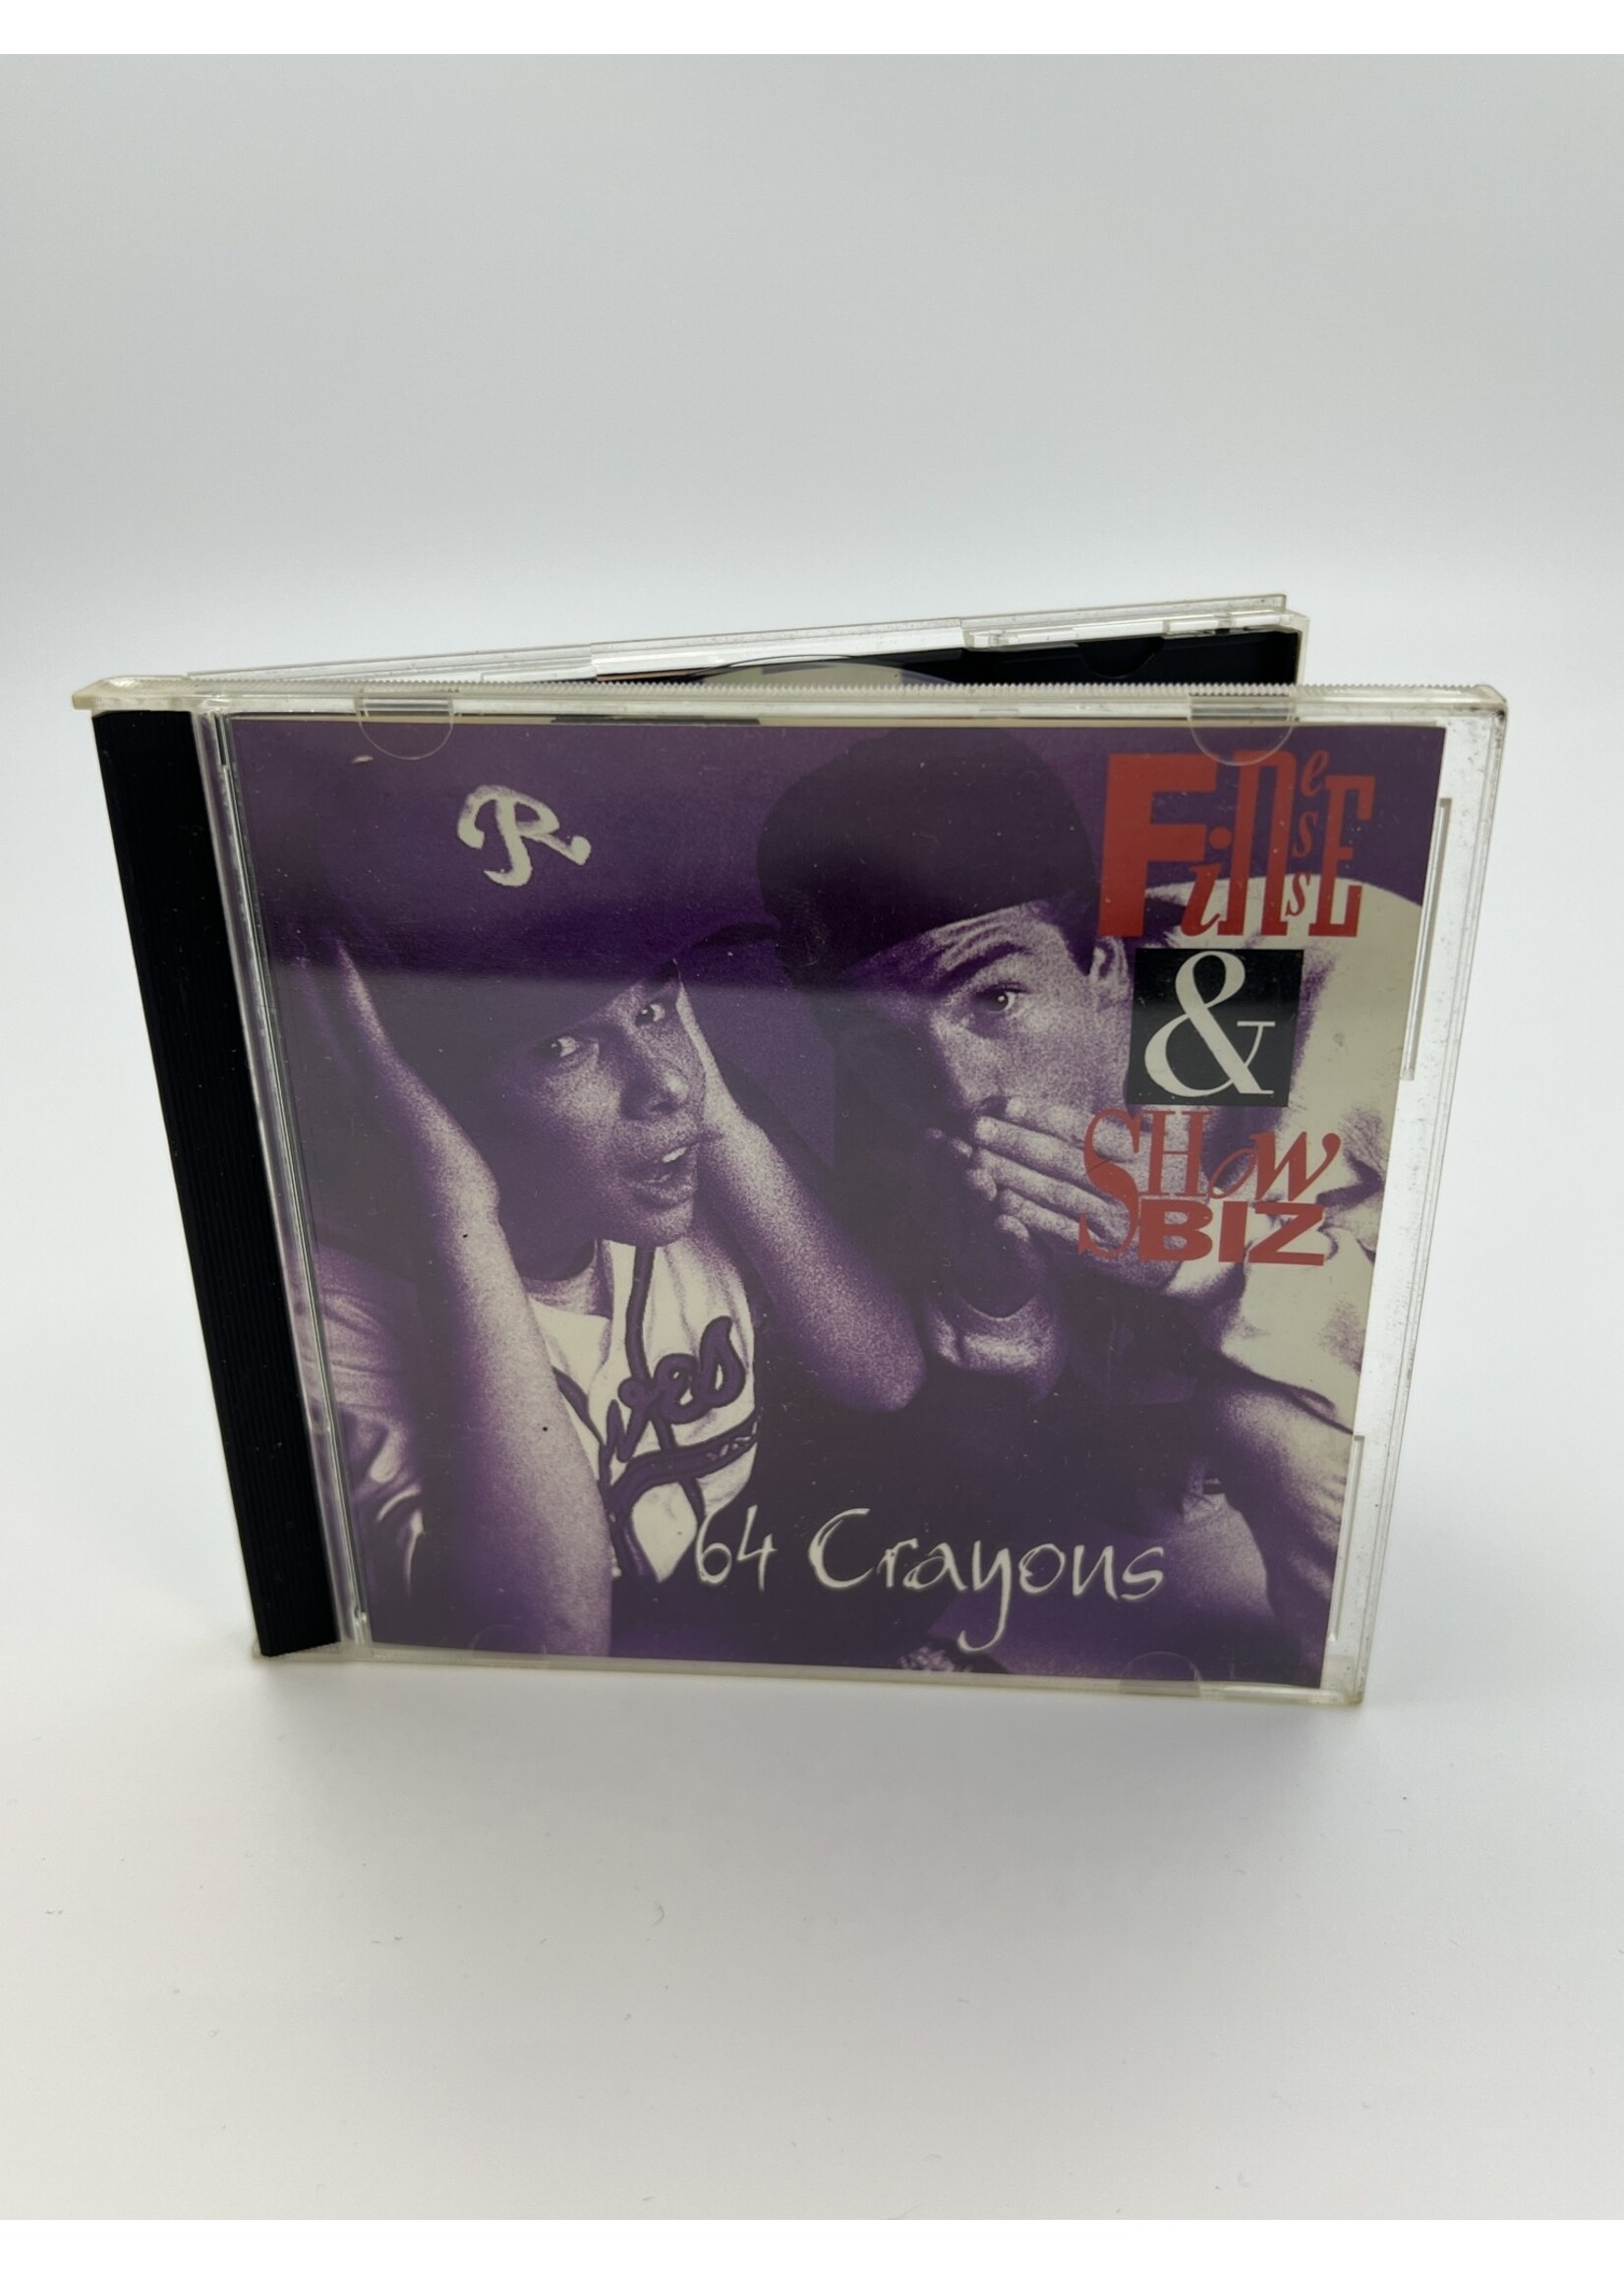 CD Finesse And Showbiz 64 Crayons CD